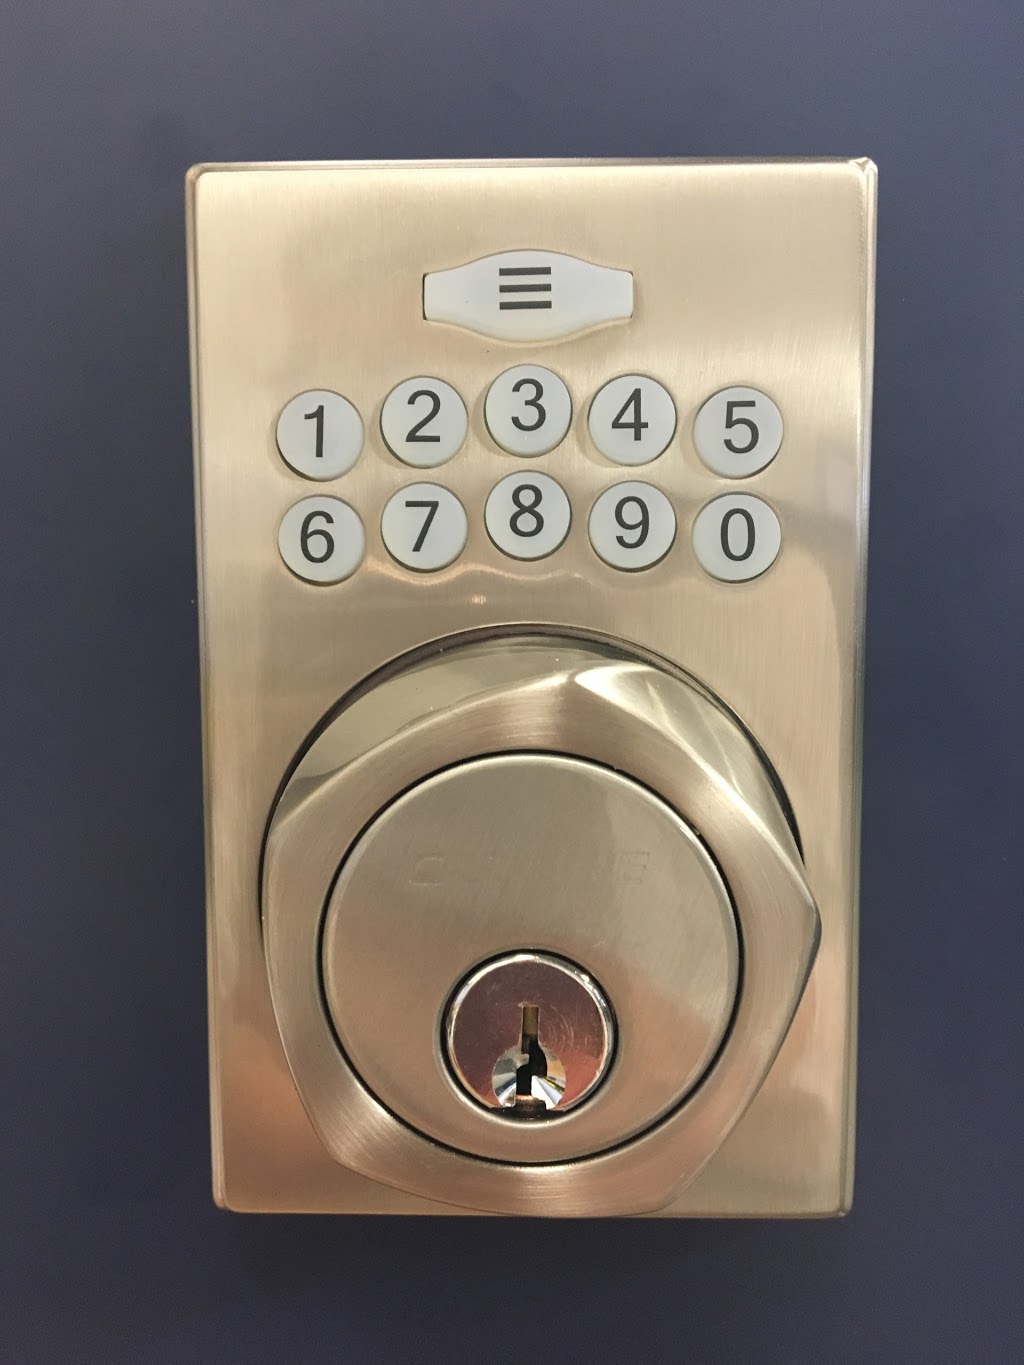 Allstrong Locksmiths and Security - Brisbane | U7/1118 Oxley Rd, Oxley QLD 4075, Australia | Phone: (07) 3376 9970